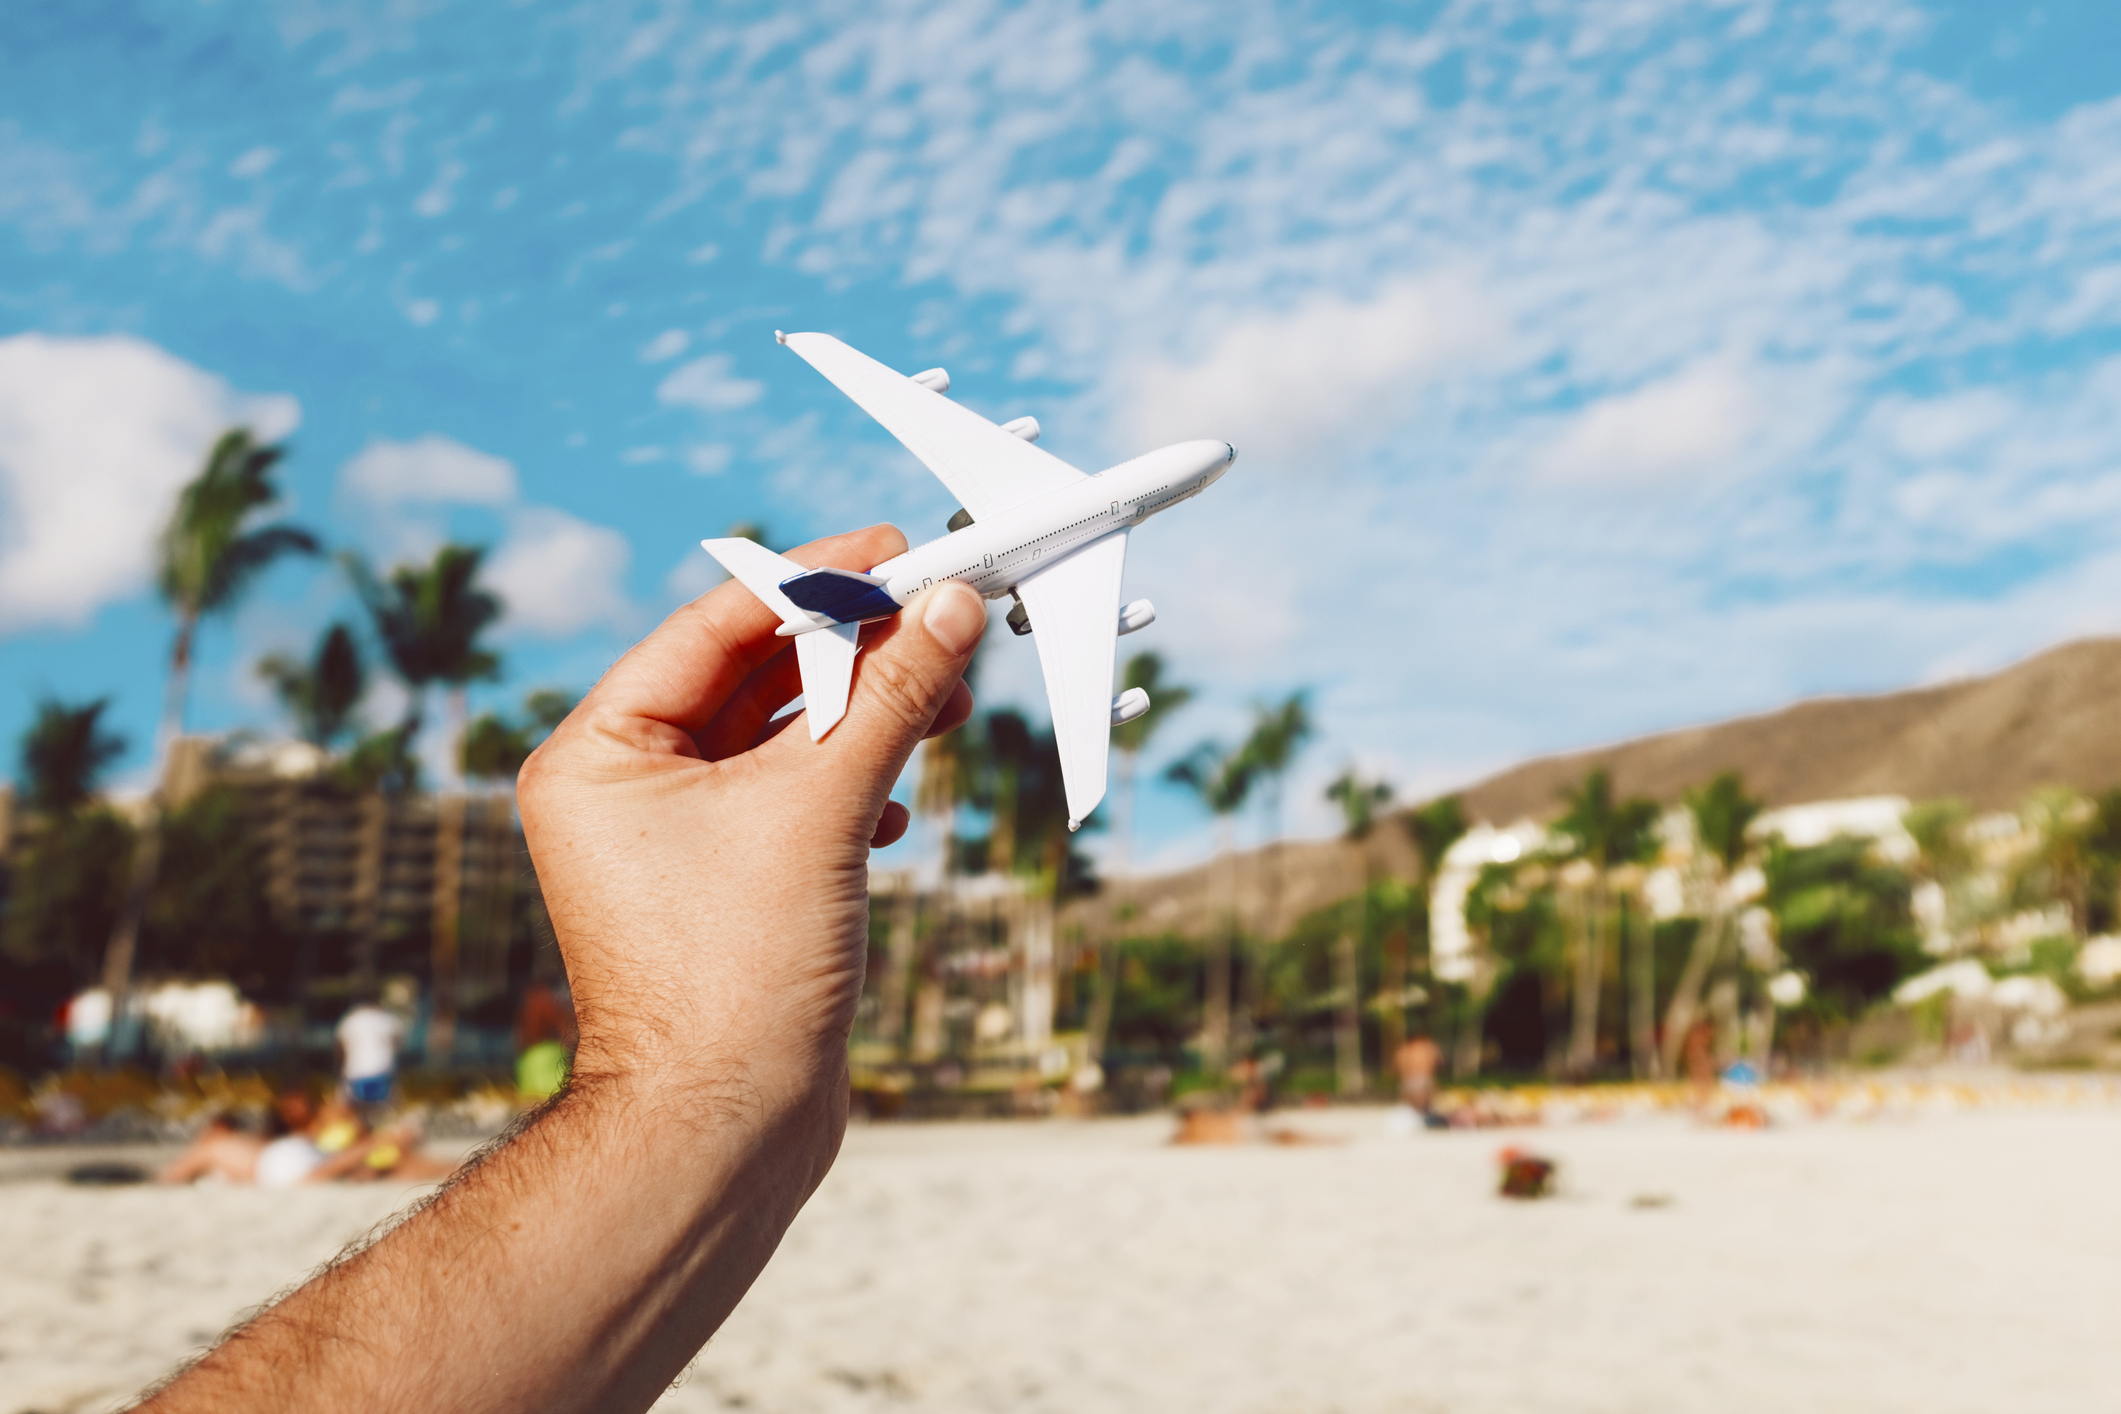 Person holds toy airplane on beach.